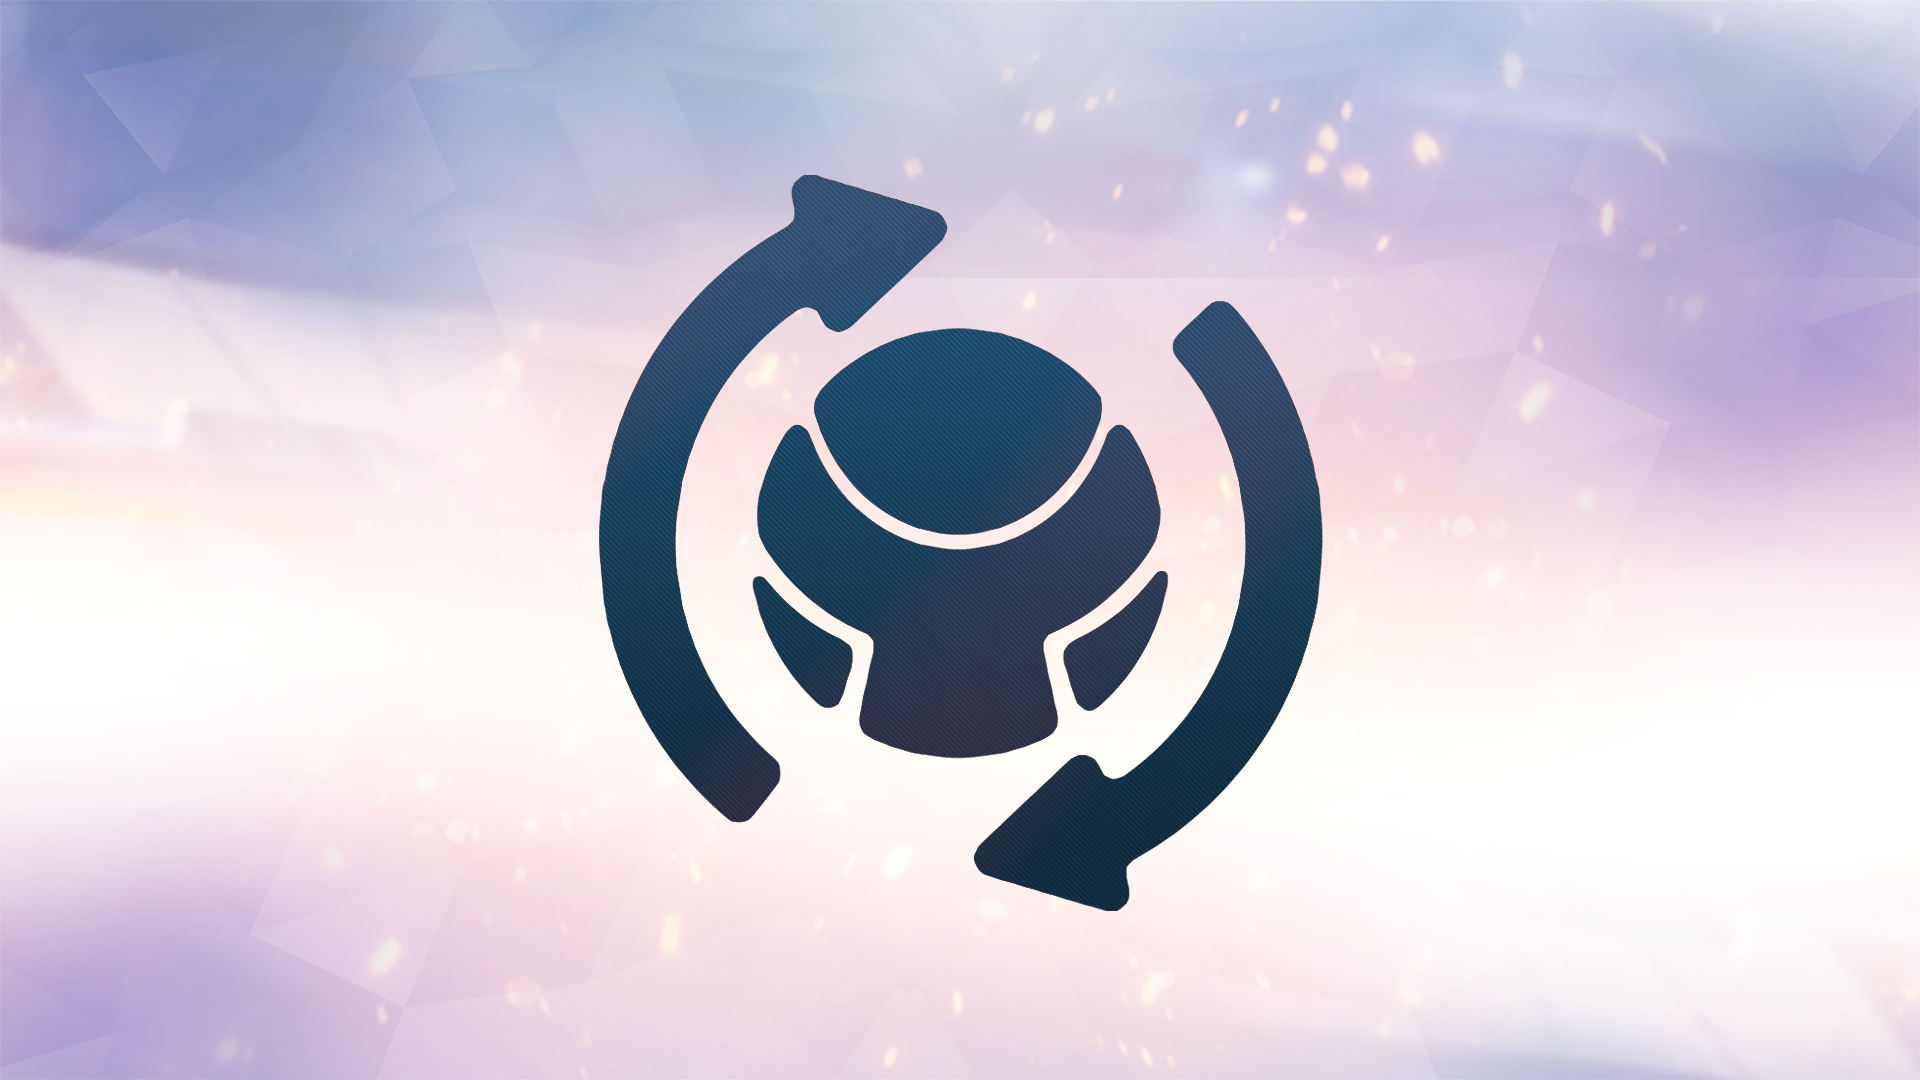 Icon for Strike